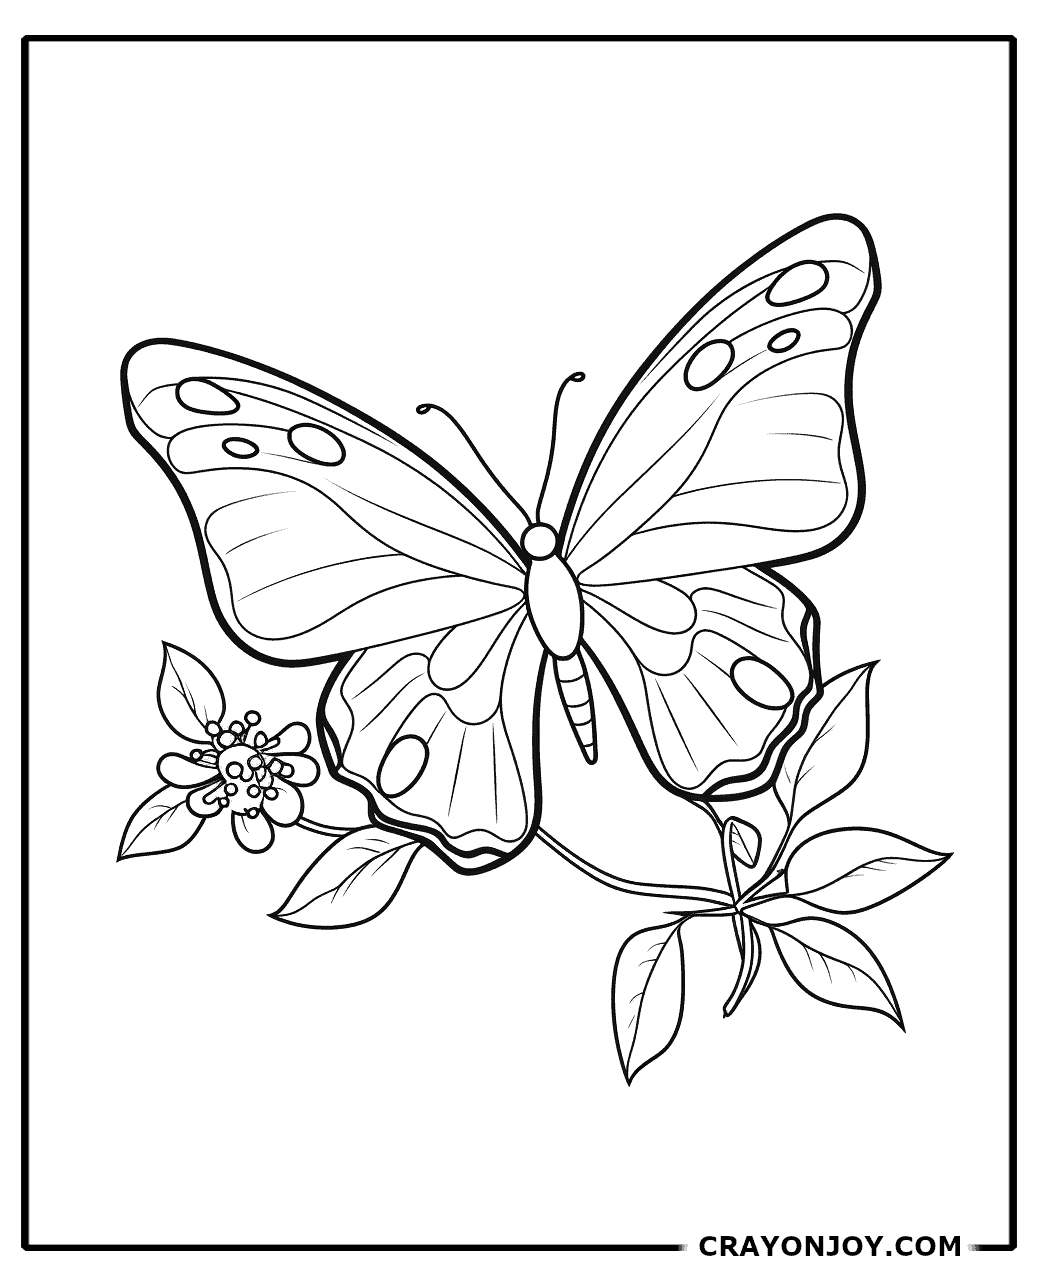 Free Printable Butterfly Coloring Pages for Kids & Adults